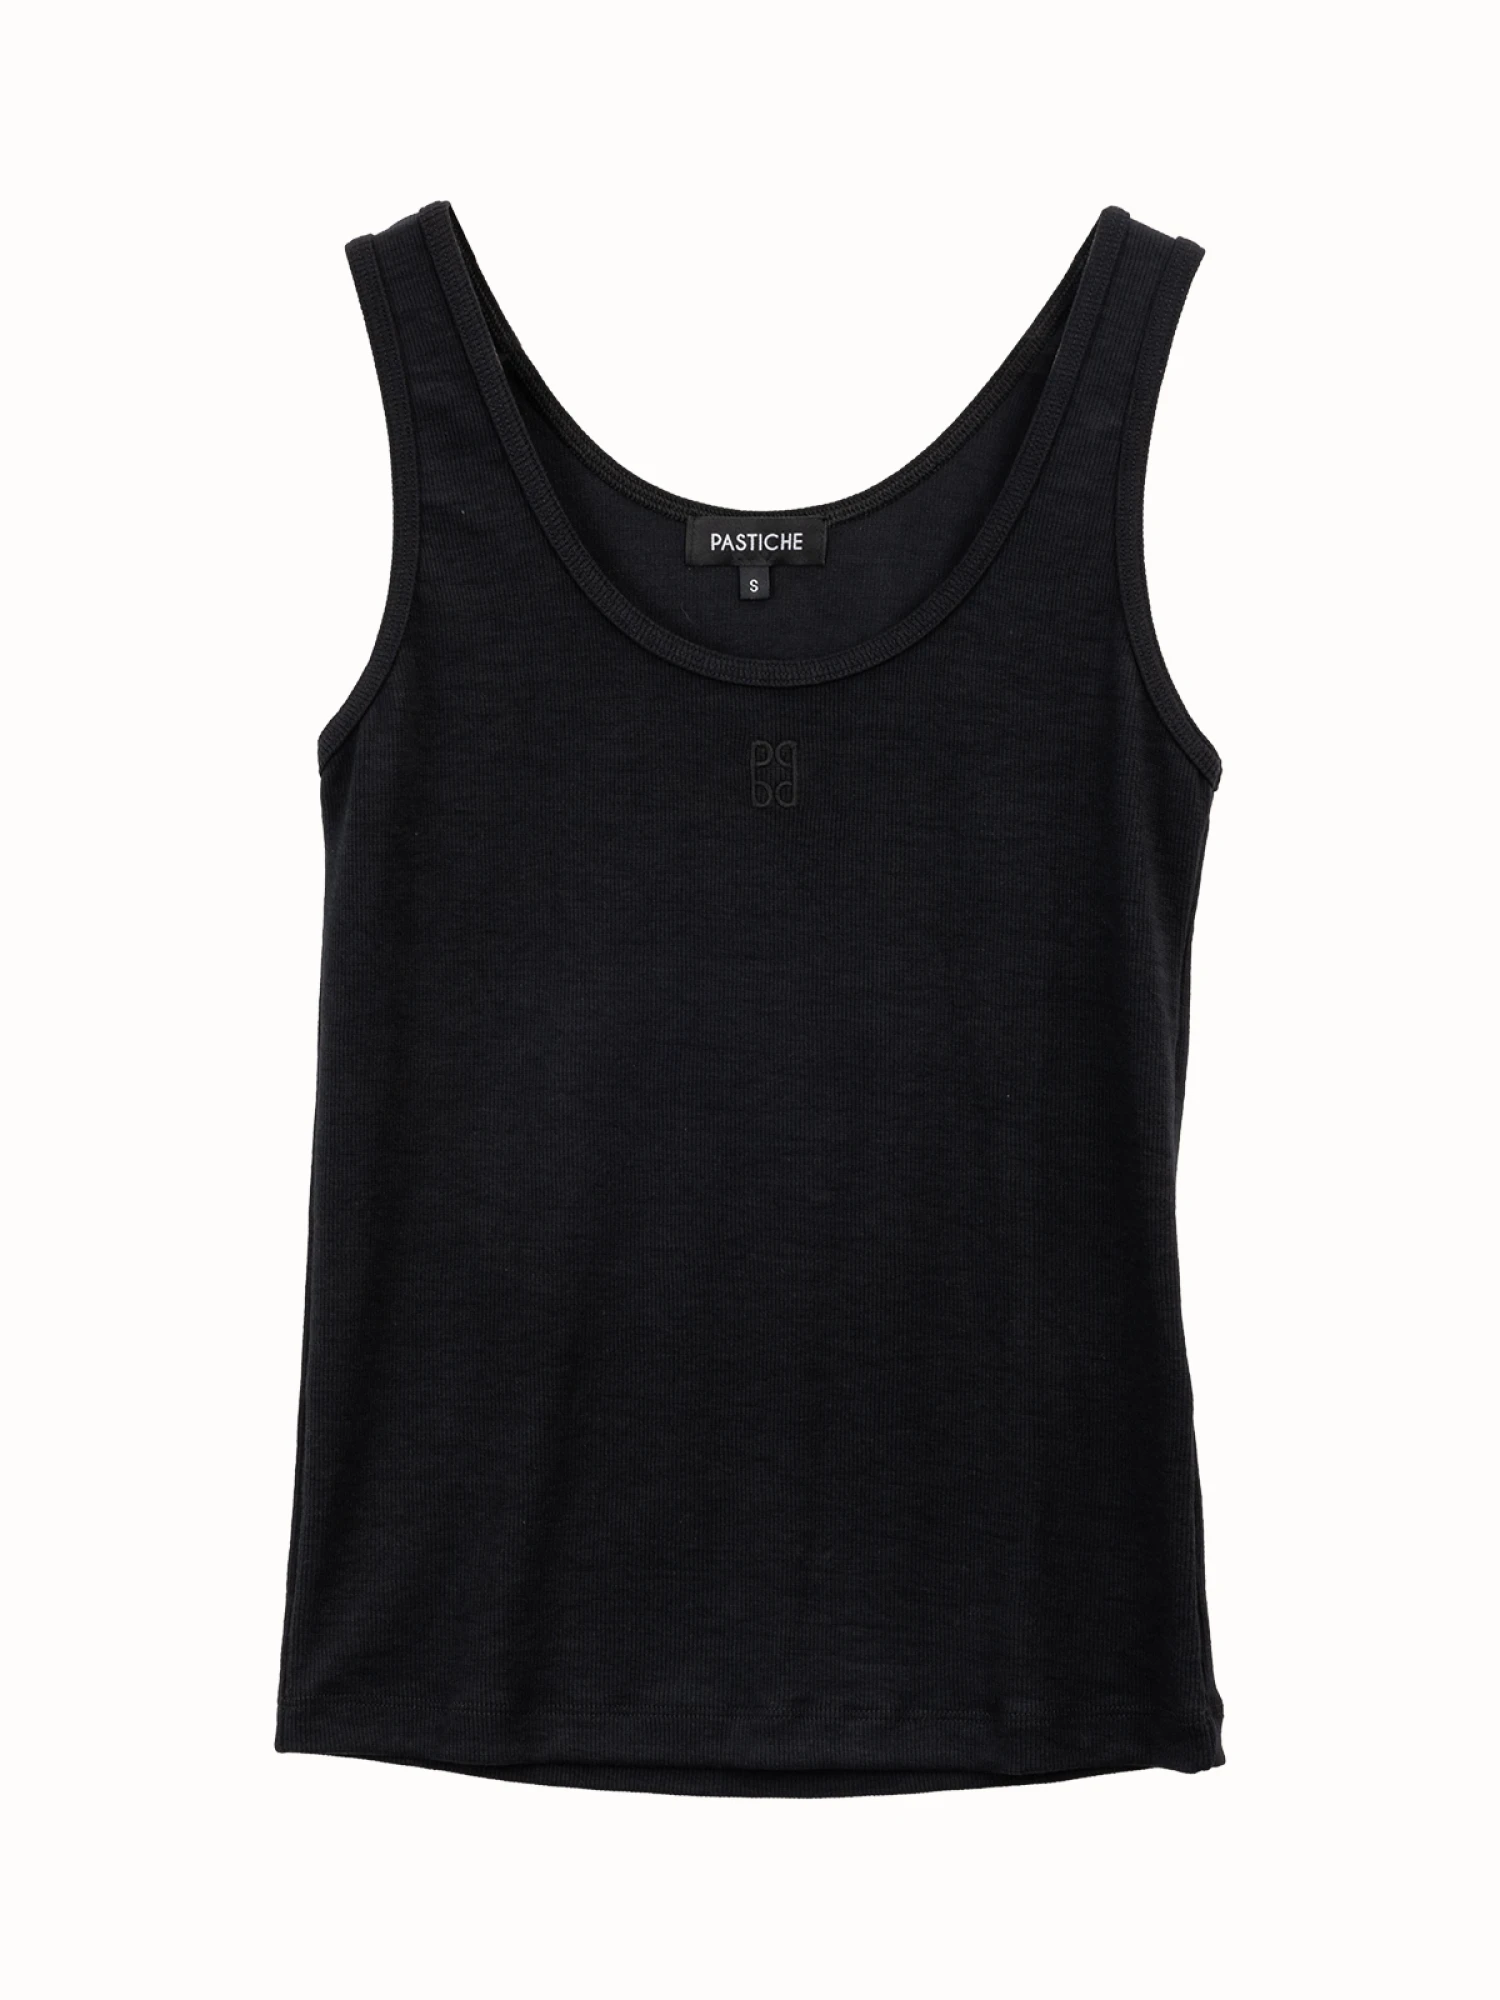 Musculosa Candy negro s